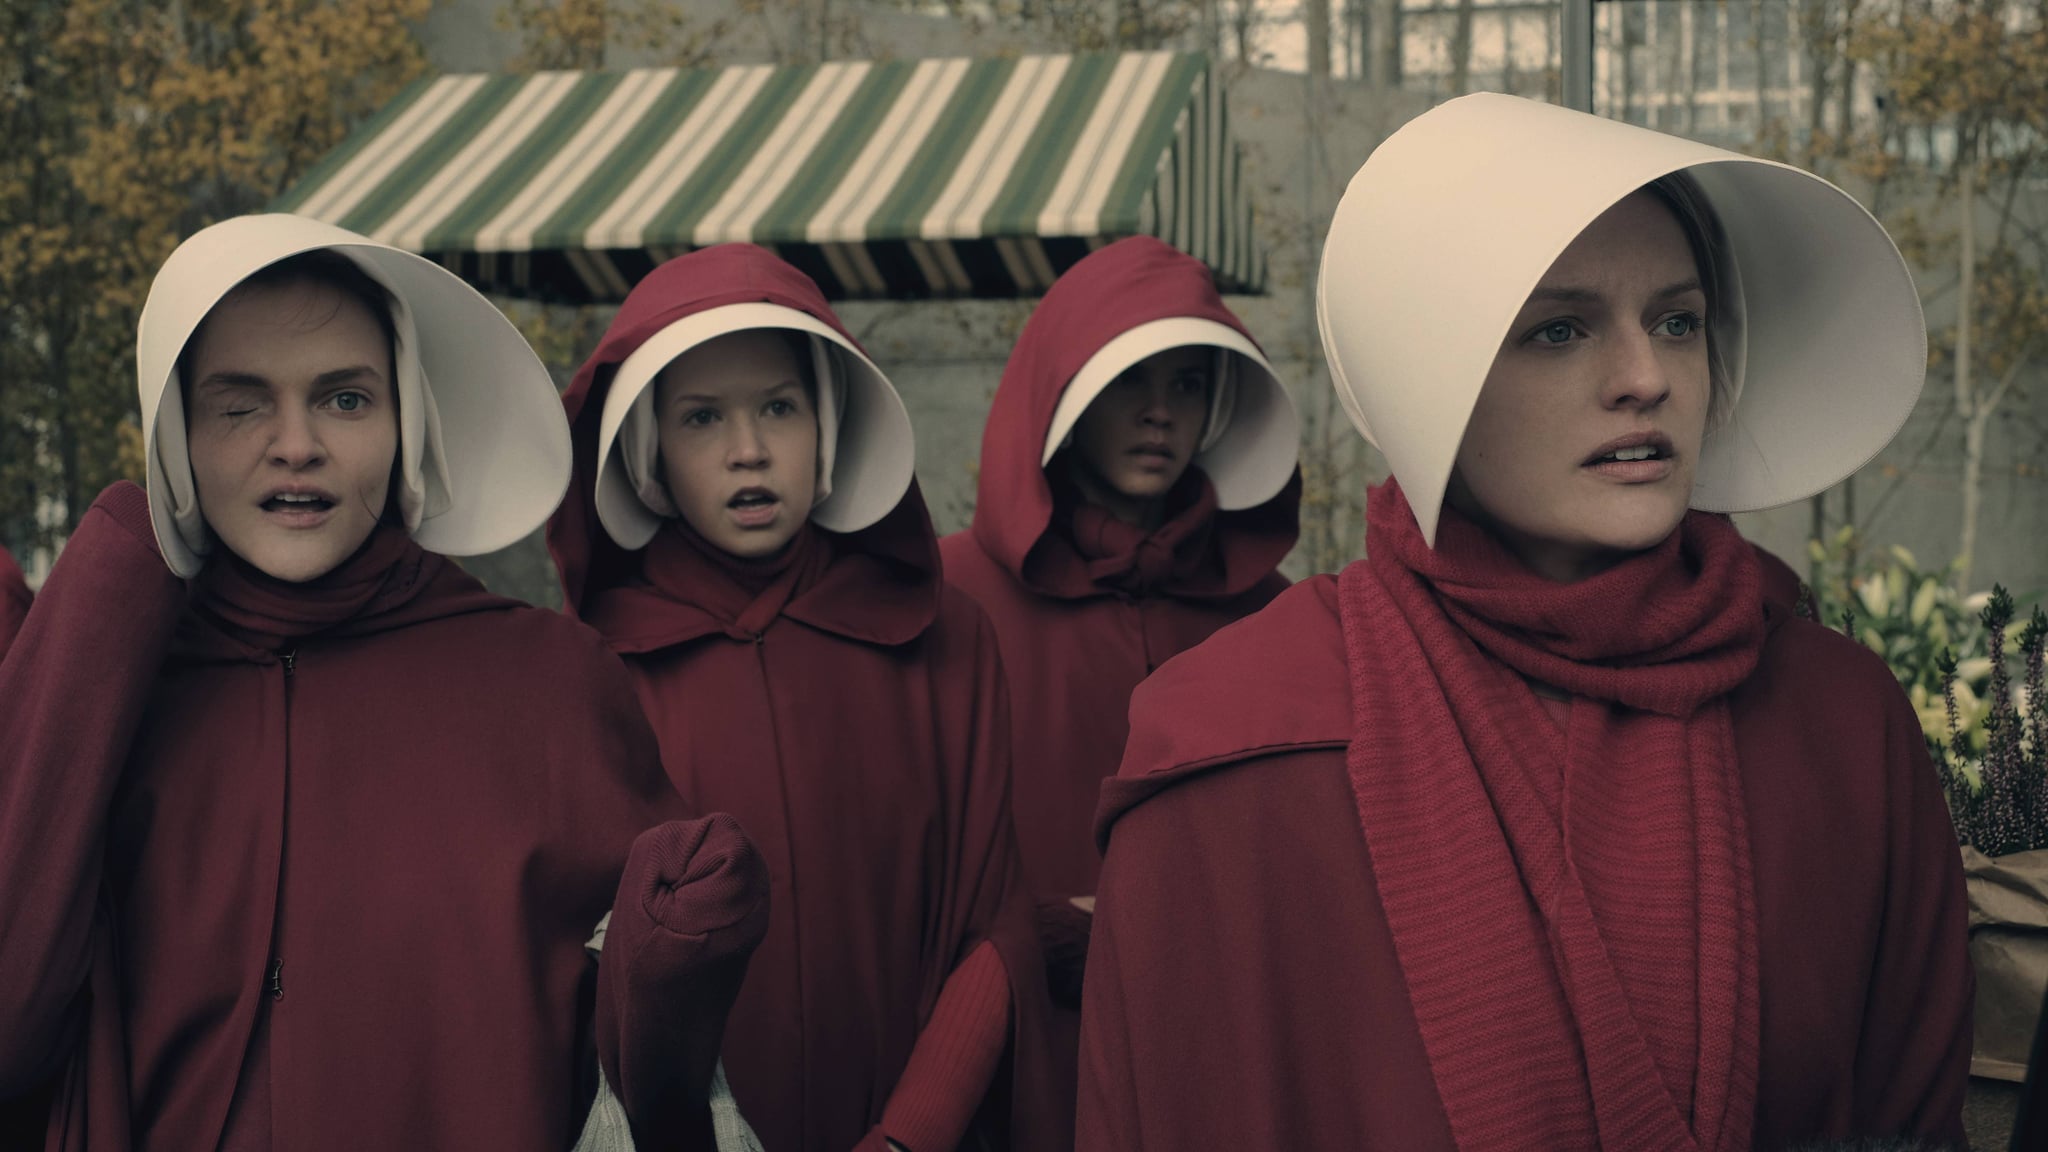 Will The Handmaid’s Tale come to Amazon Prime Videos?